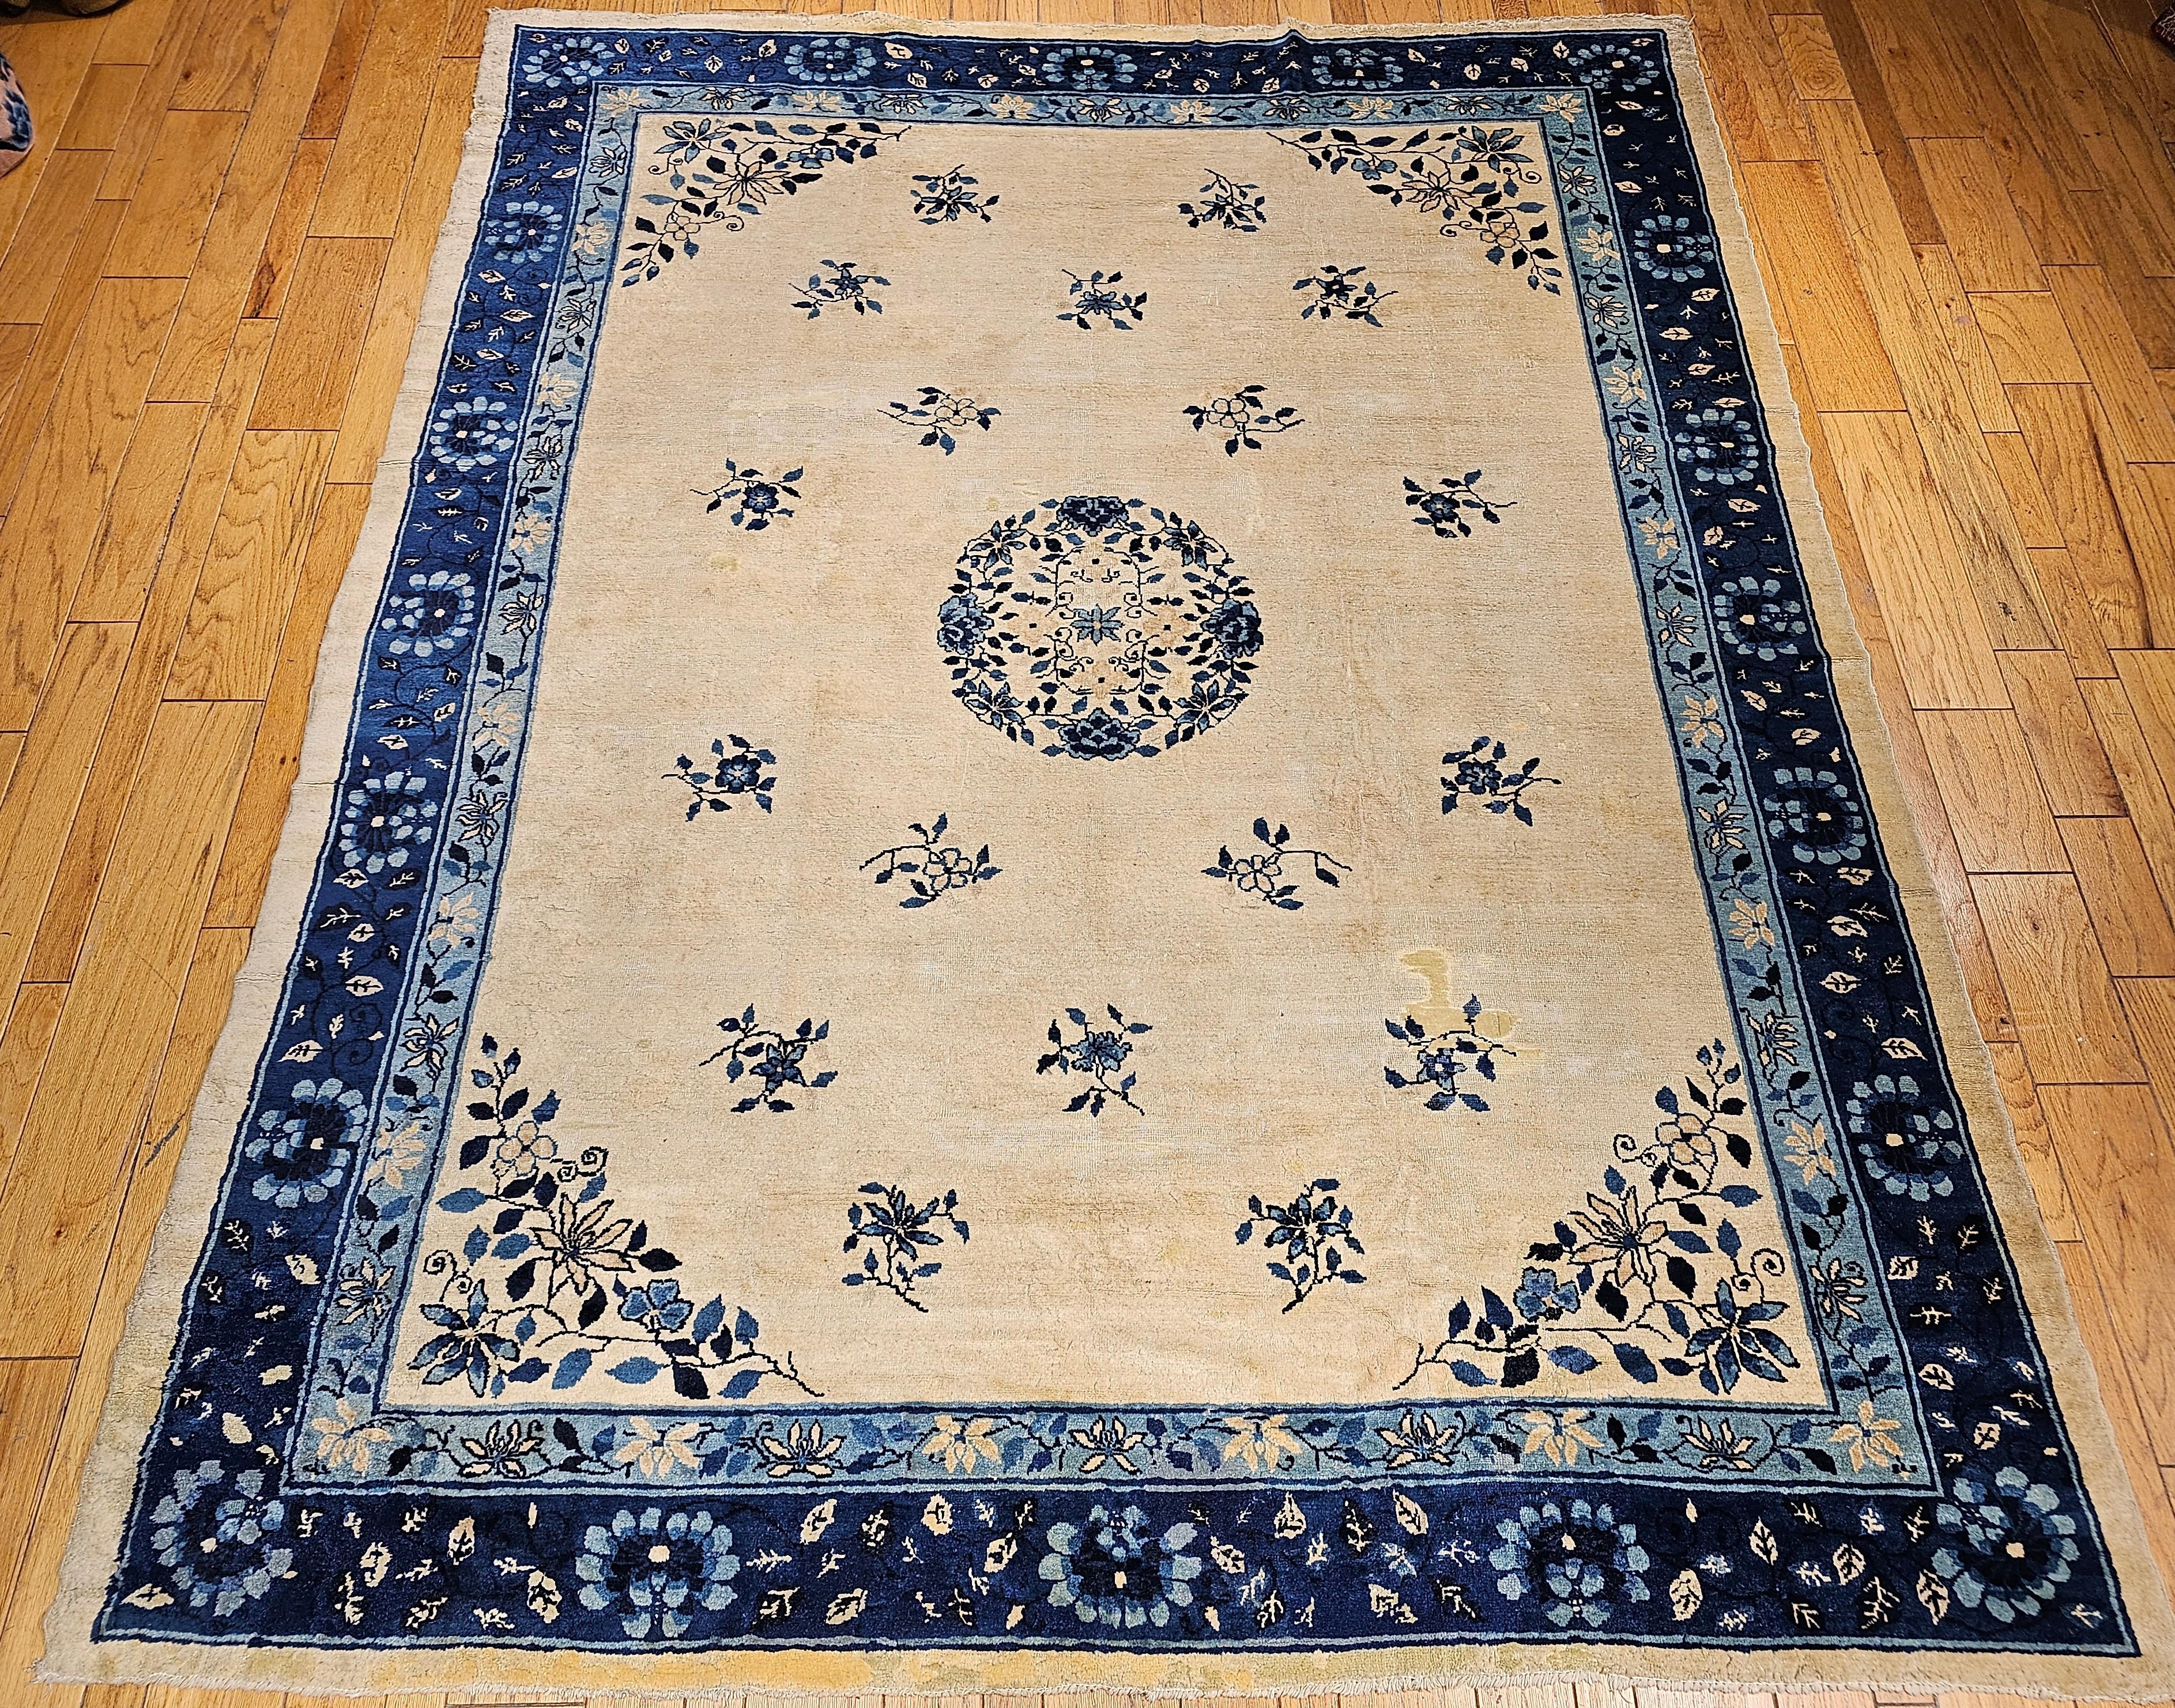 Vintage room size Chinese Peking rug from the late 19th century.  The rug has a beautiful natural or ivory color background containing the traditional Chinese flower bouquets and a wonderful central medallion in floral pattern framed by two shades